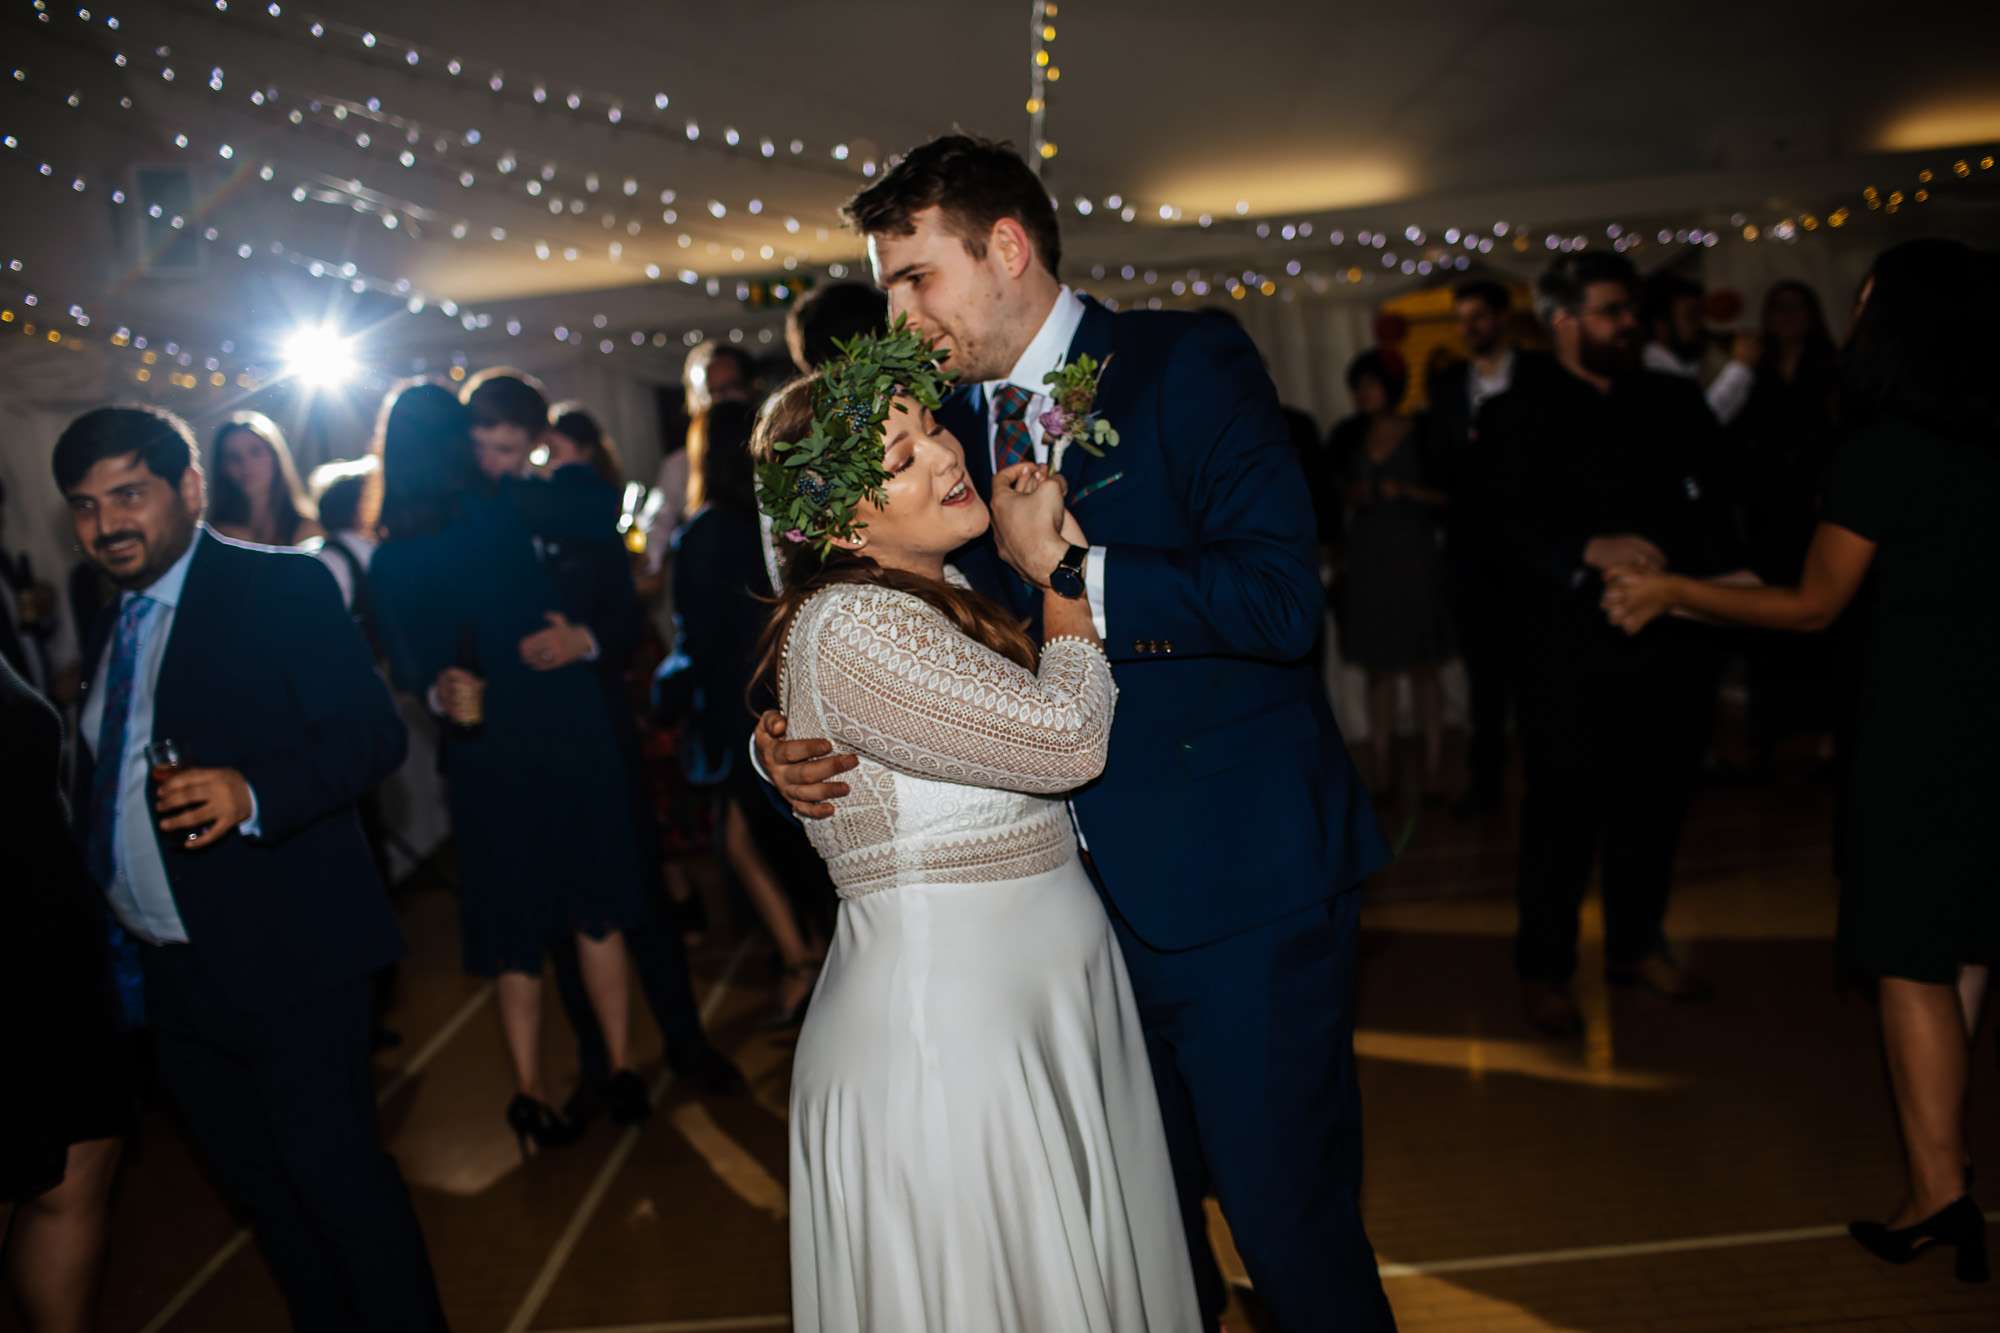 First dance at a wedding at East Keswick Village Hall